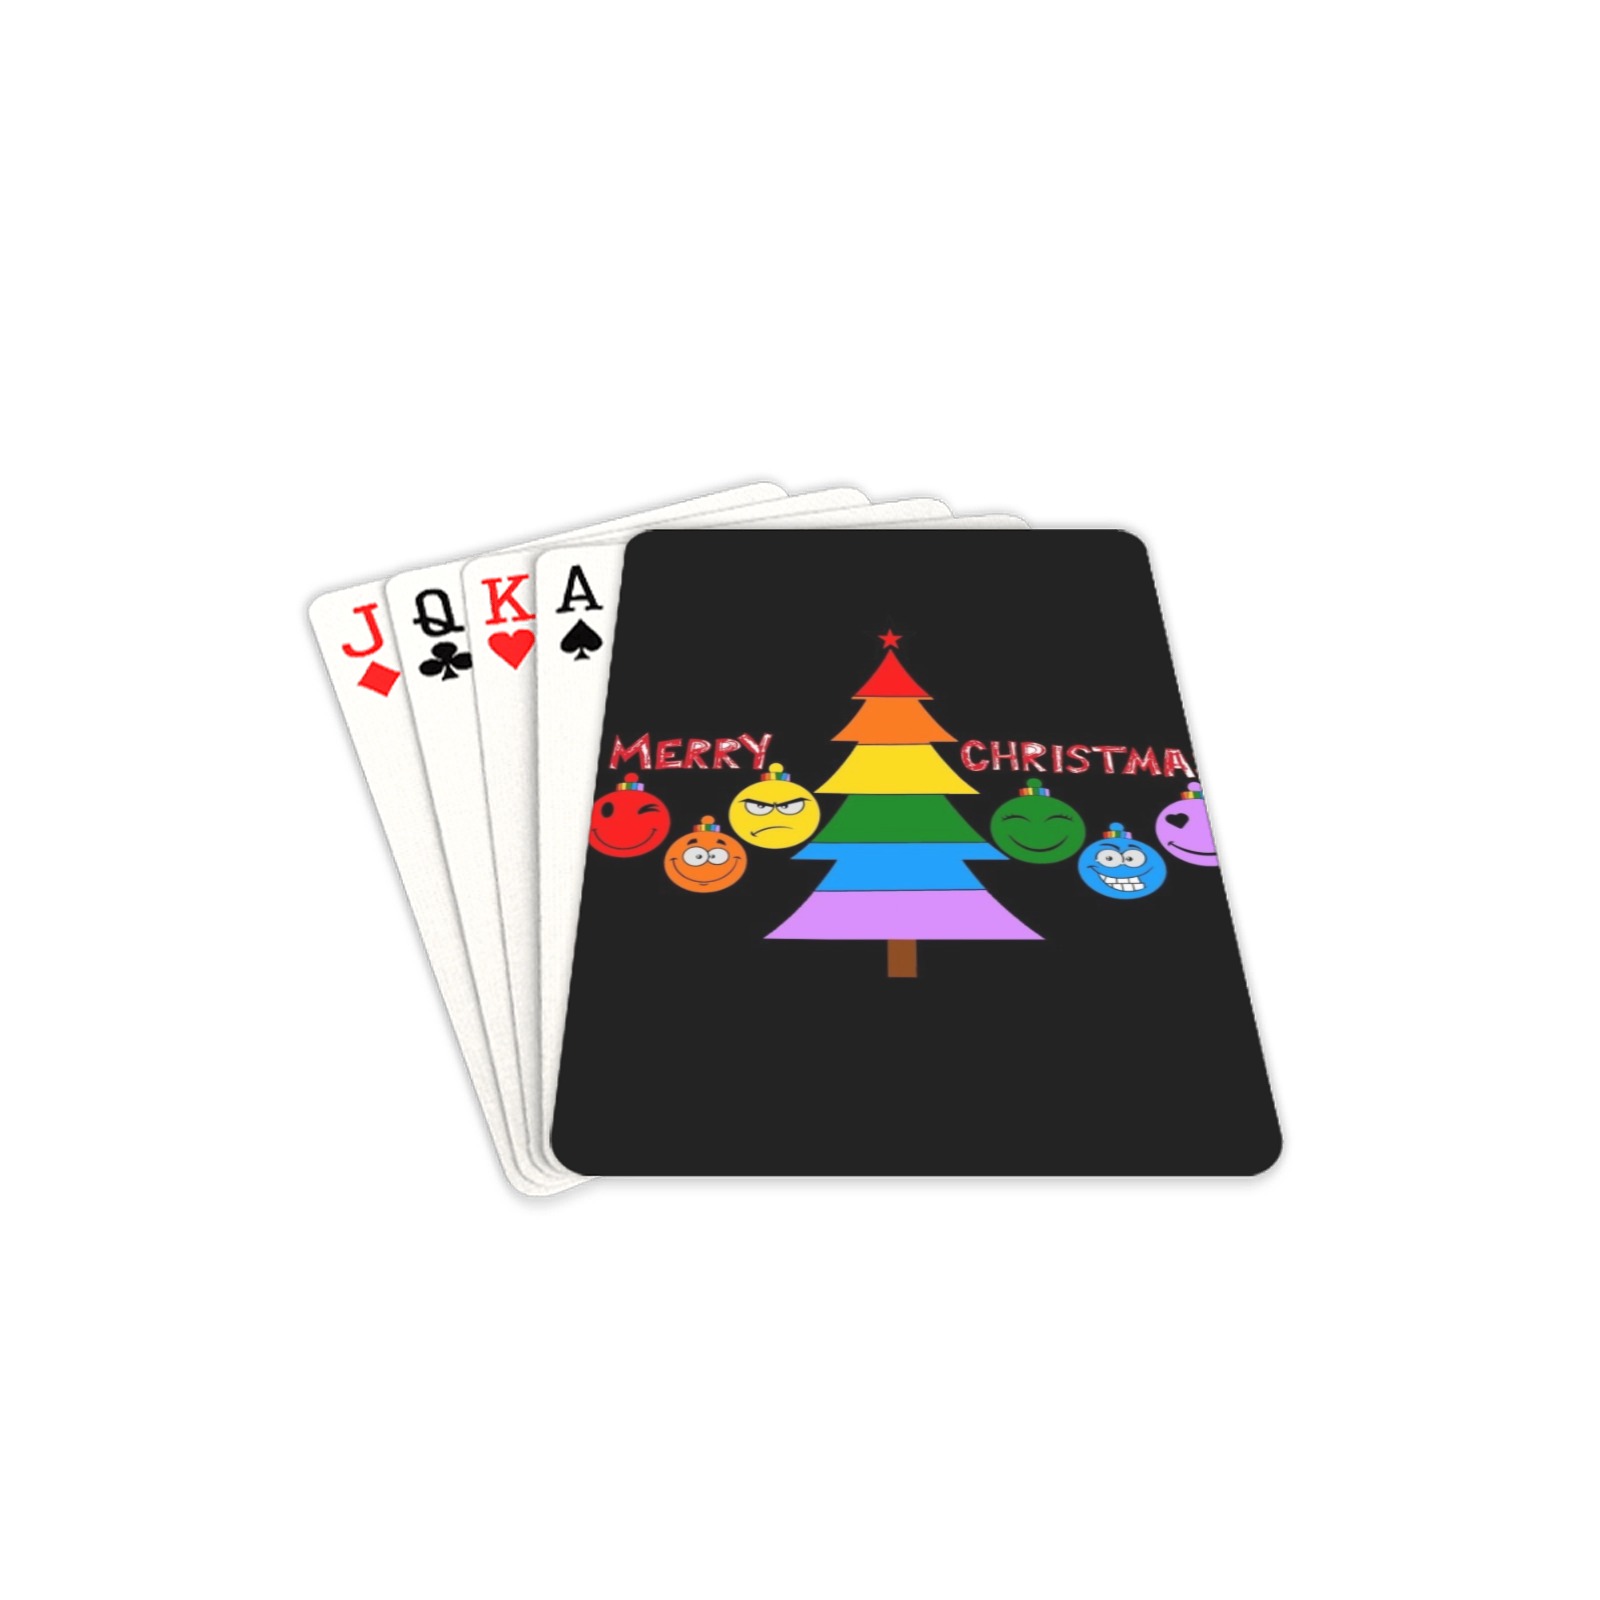 Merry Gay Christmas by Nico Bielow Playing Cards 2.5"x3.5"